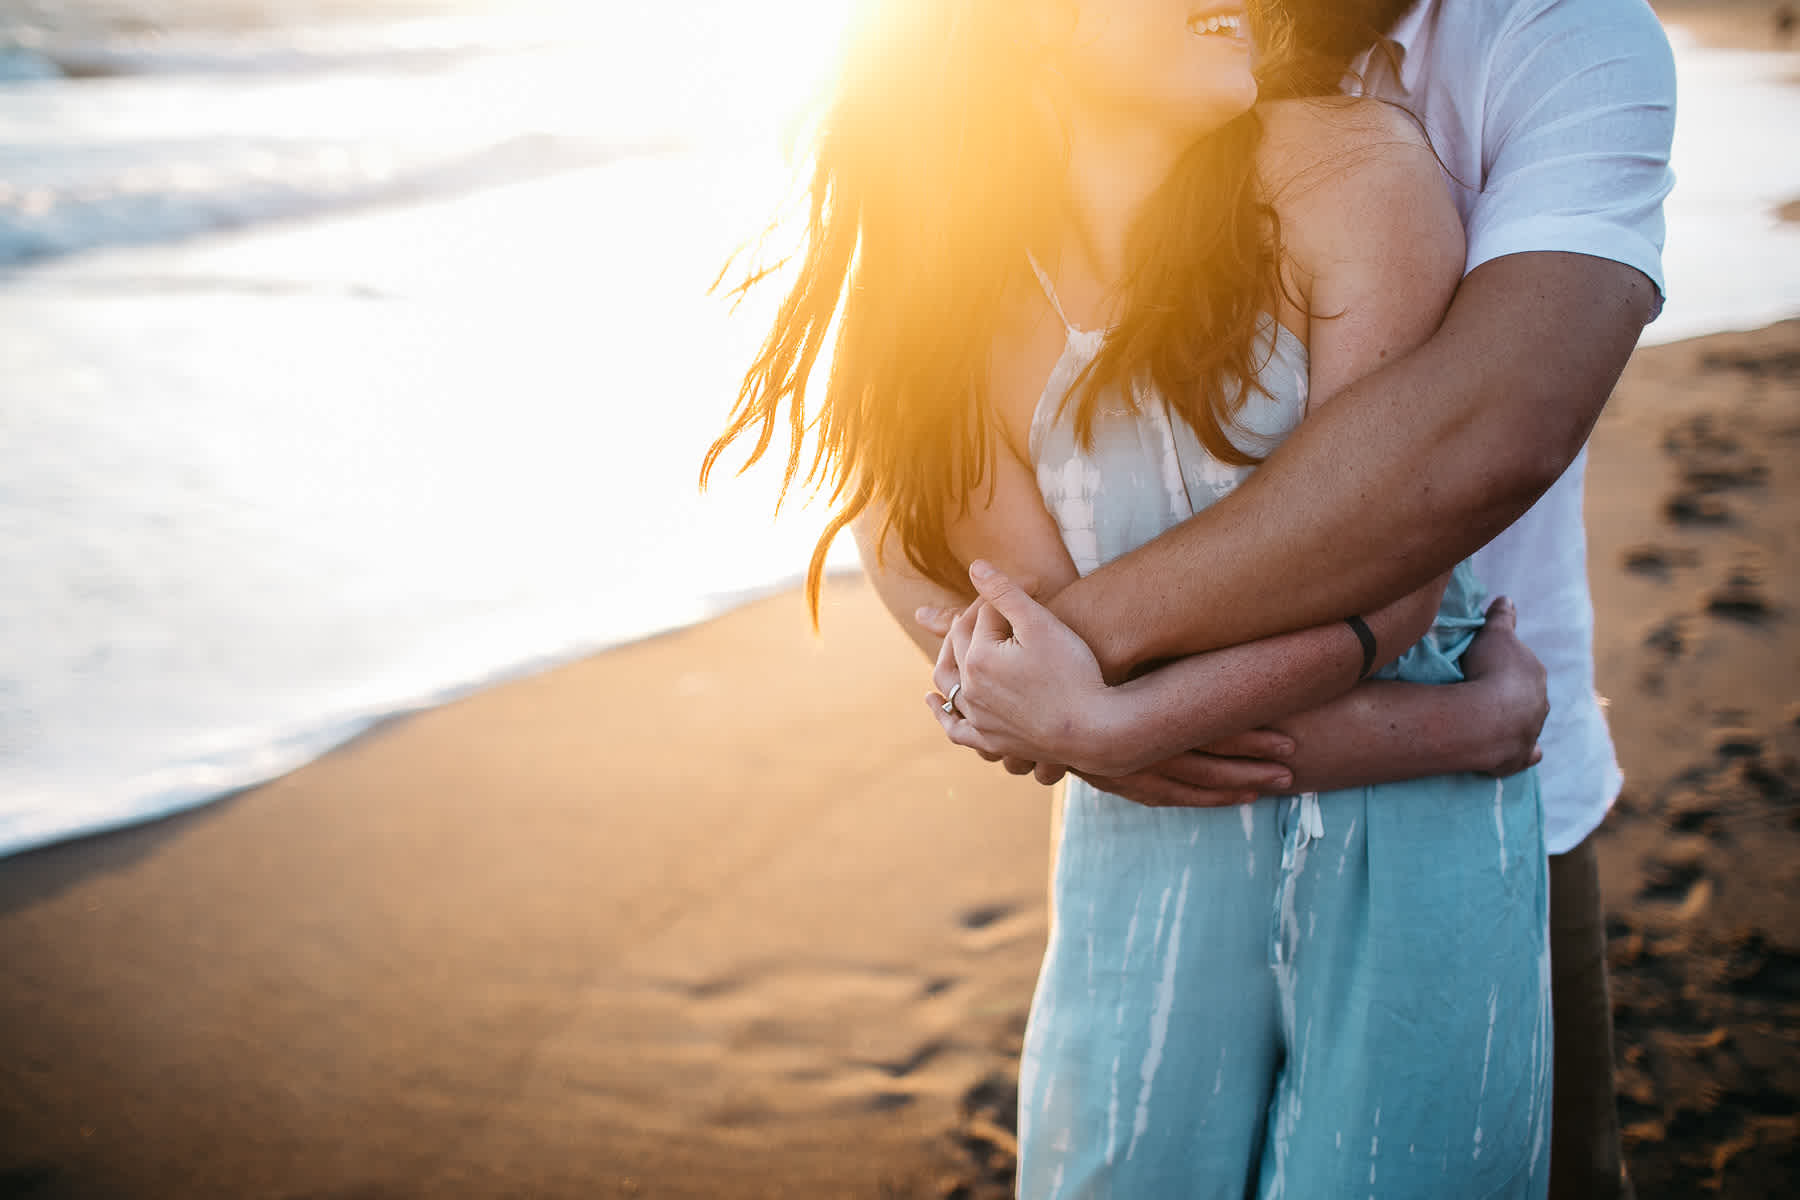 marin-headlands-rodeo-beach-lifestyle-laughter-engagement-session-61